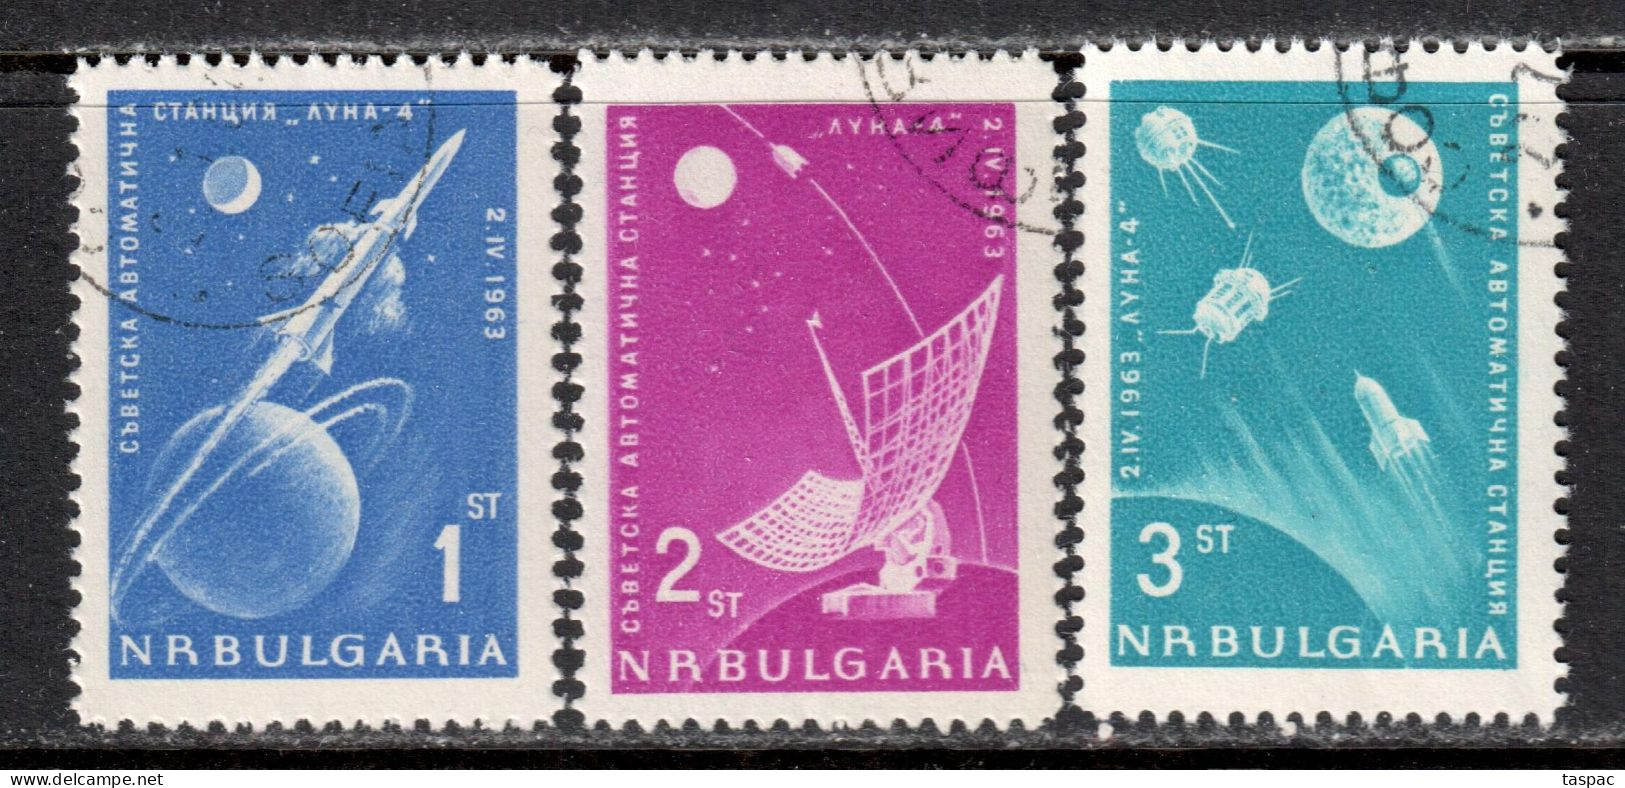 Bulgaria 1963 Mi# 1388-1390 Used - Russia's Rocket To The Moon / Space - Used Stamps